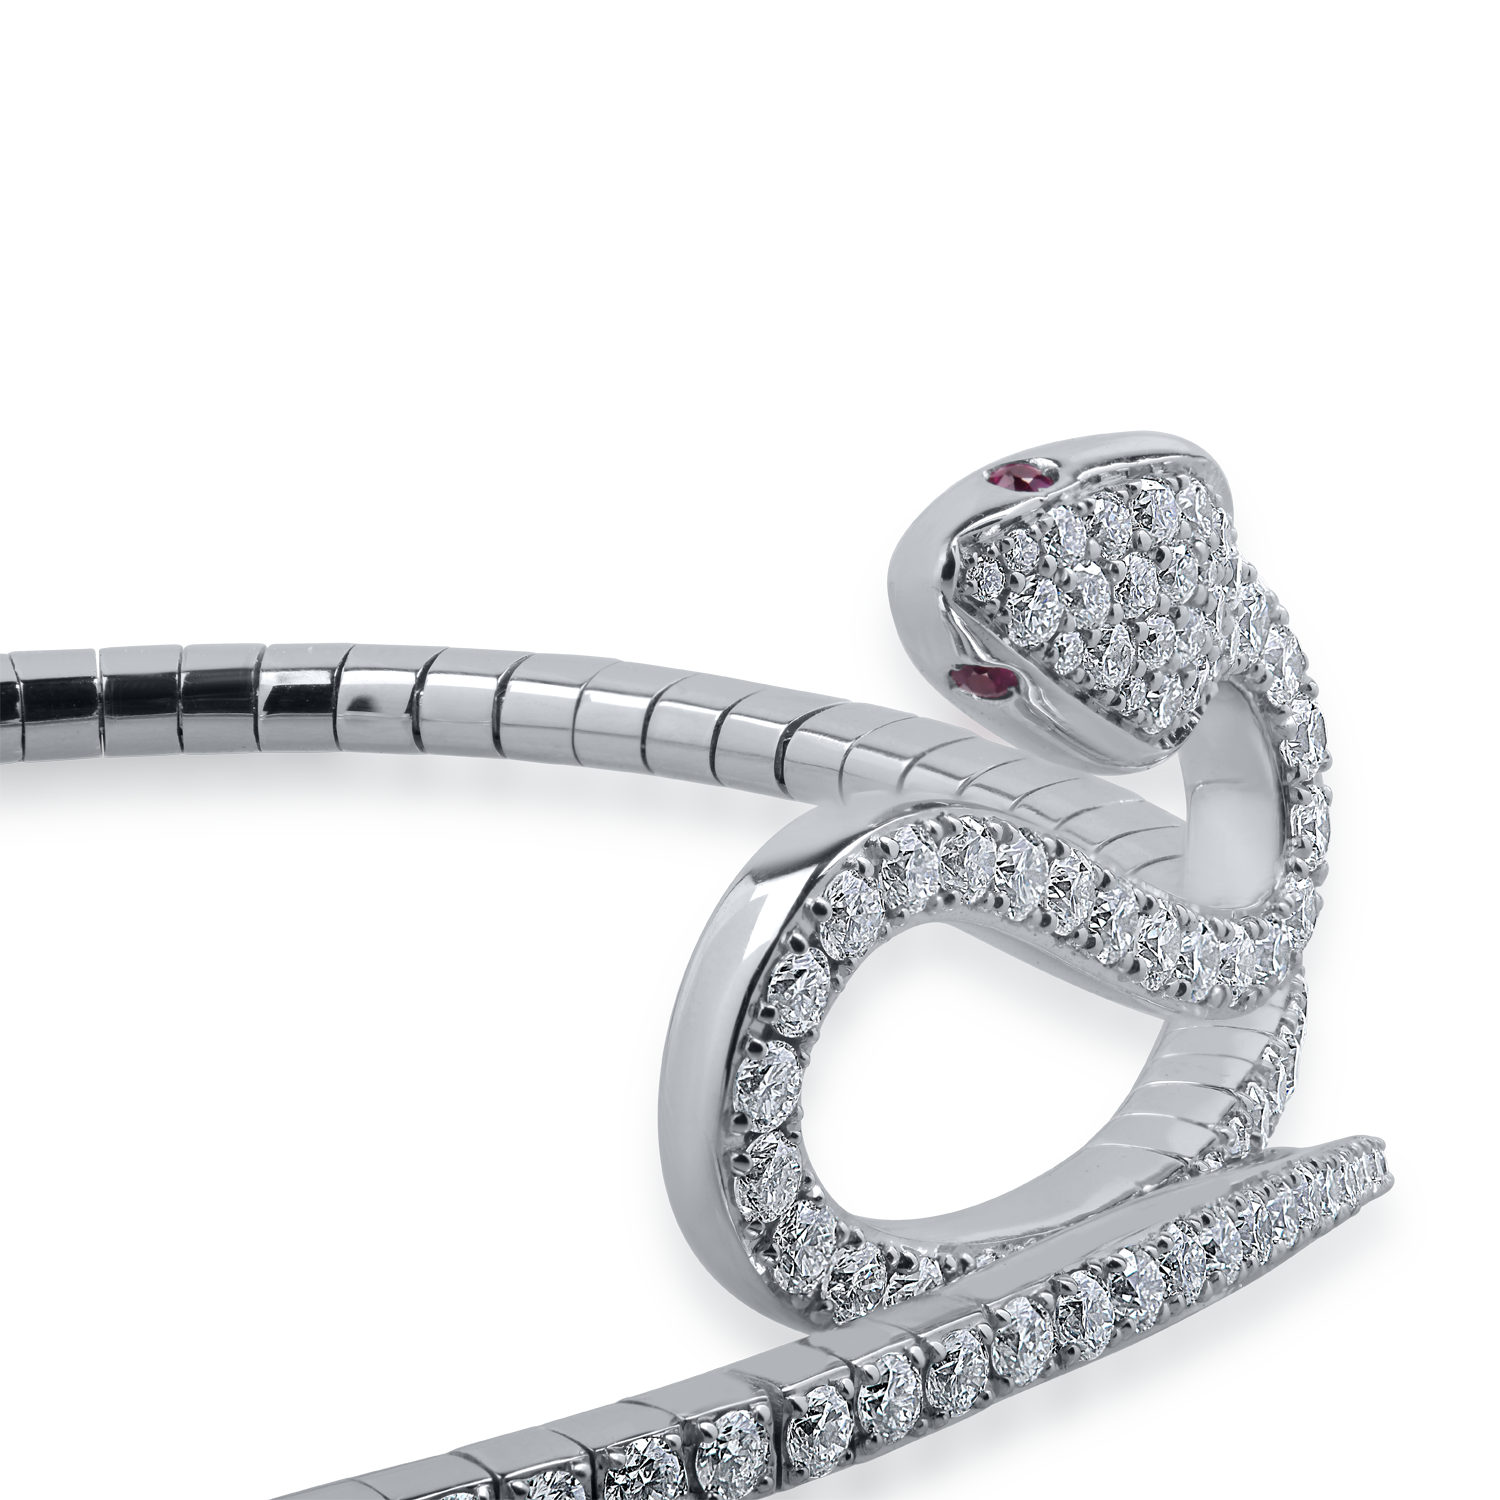 White gold bracelet with 3.94ct diamonds and 0.03ct rubies